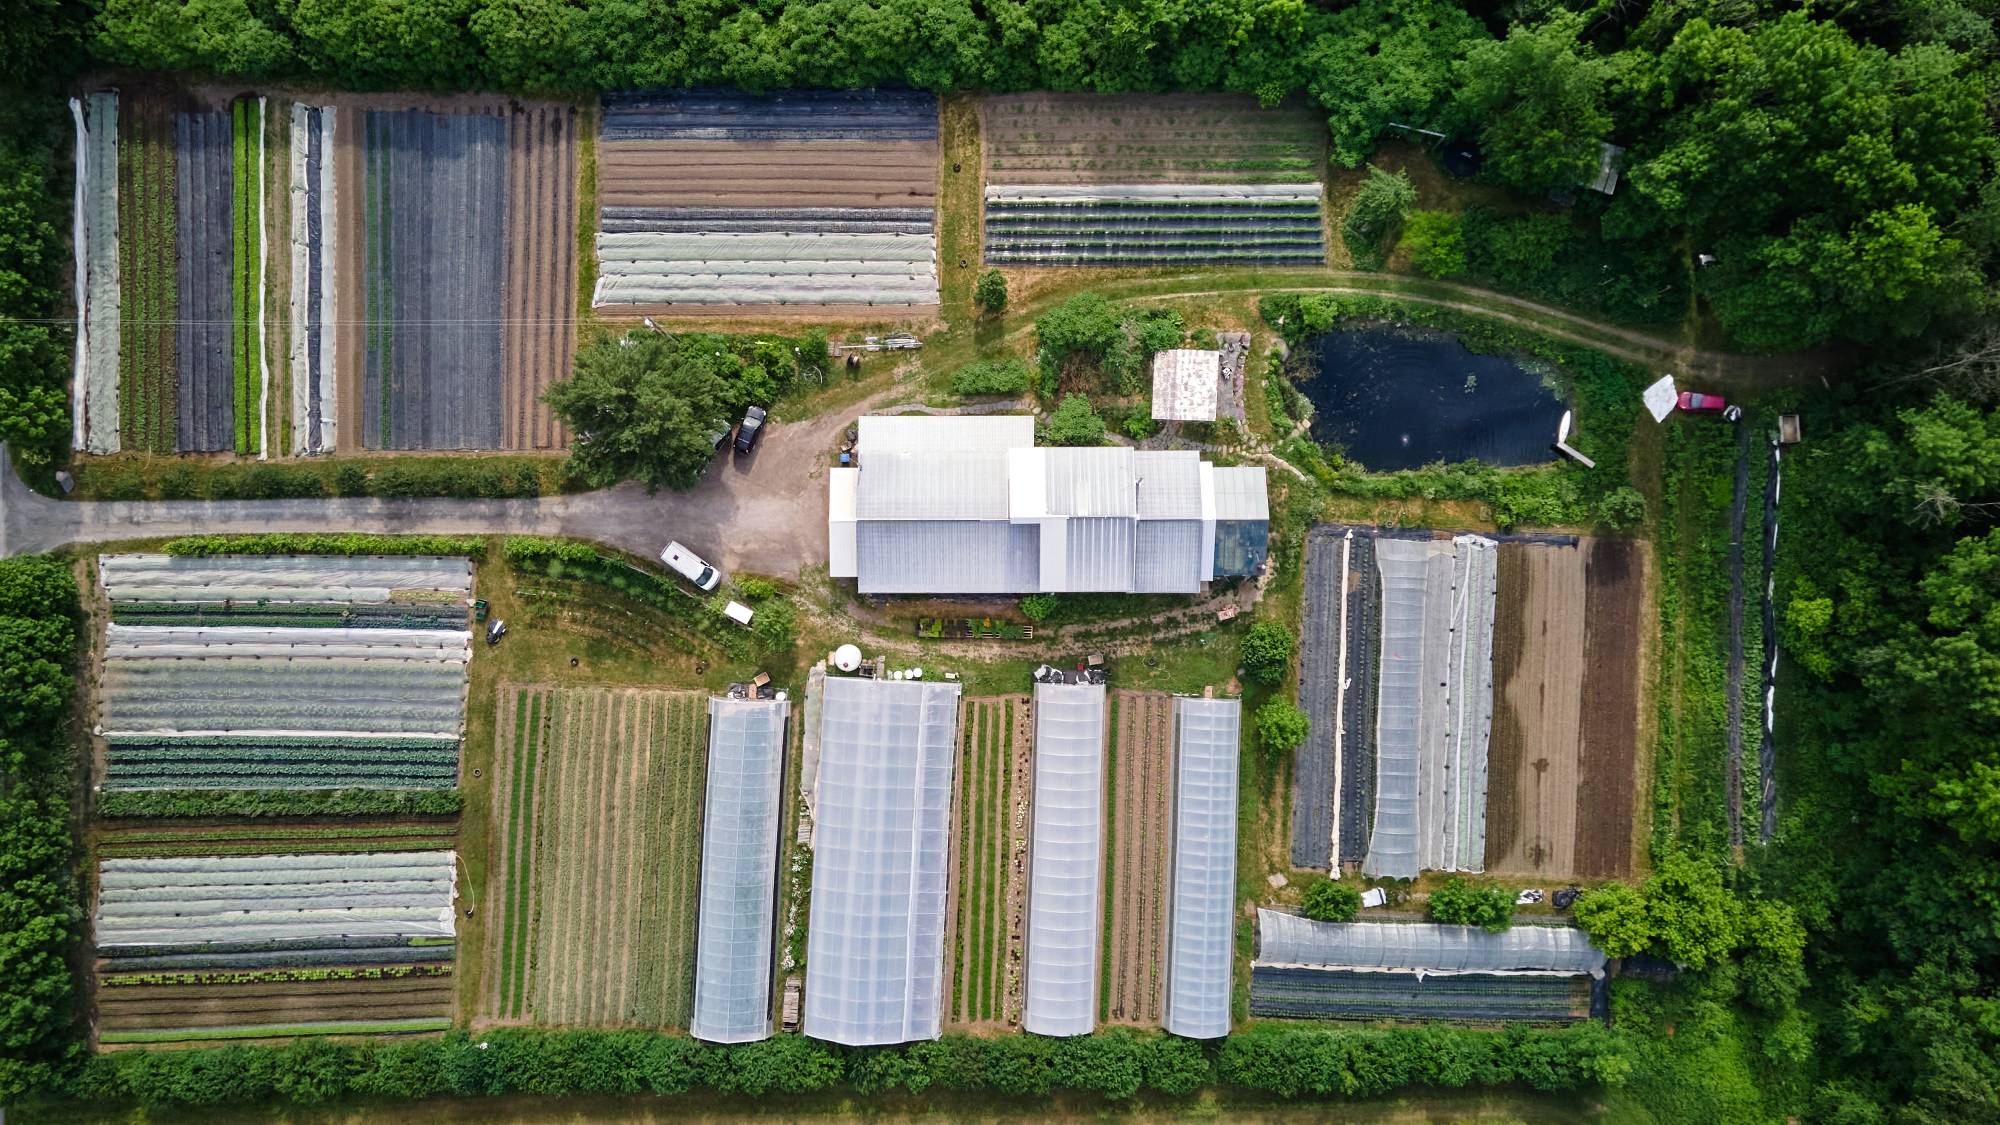 8 Crucial Advantages of Small-Scale over Large-Scale Farms